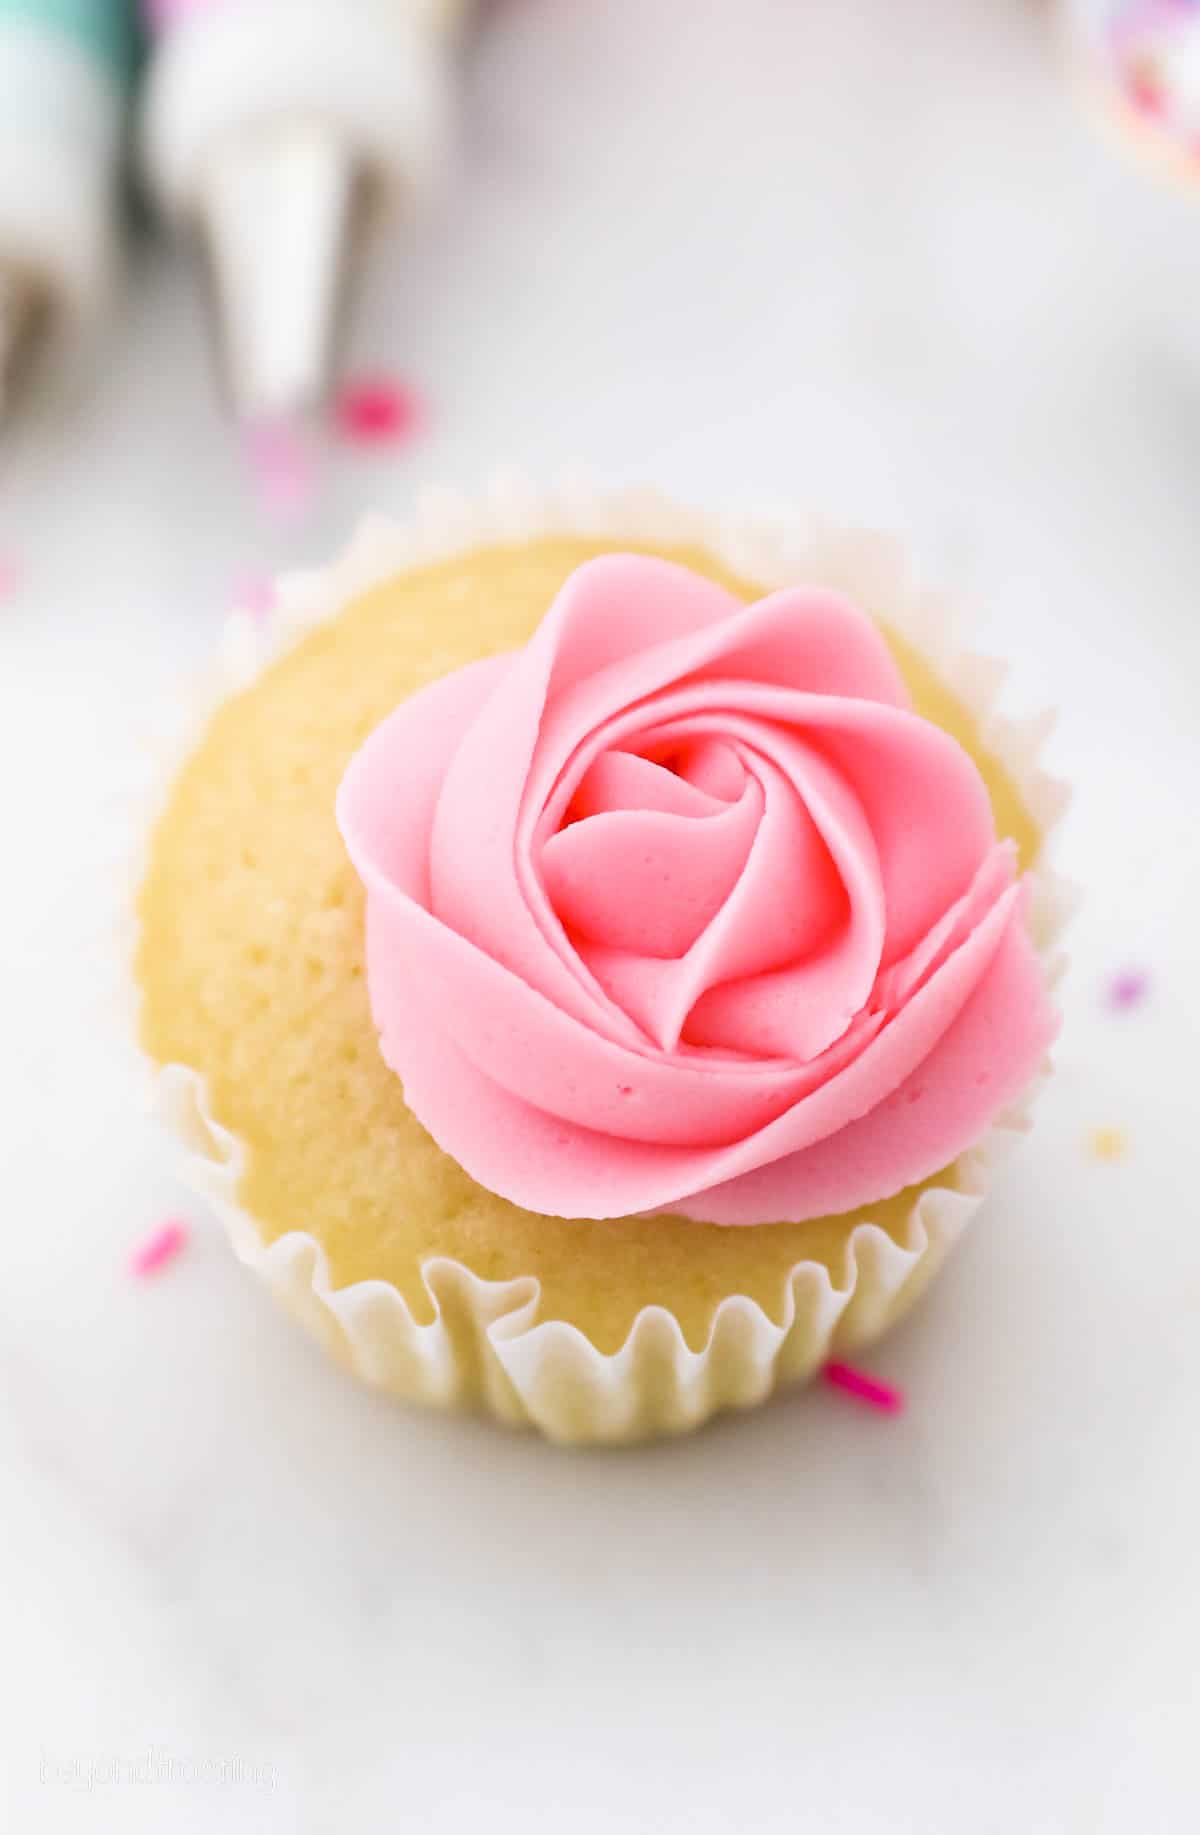 A vanilla cupcake topped with a pink buttercream rose.